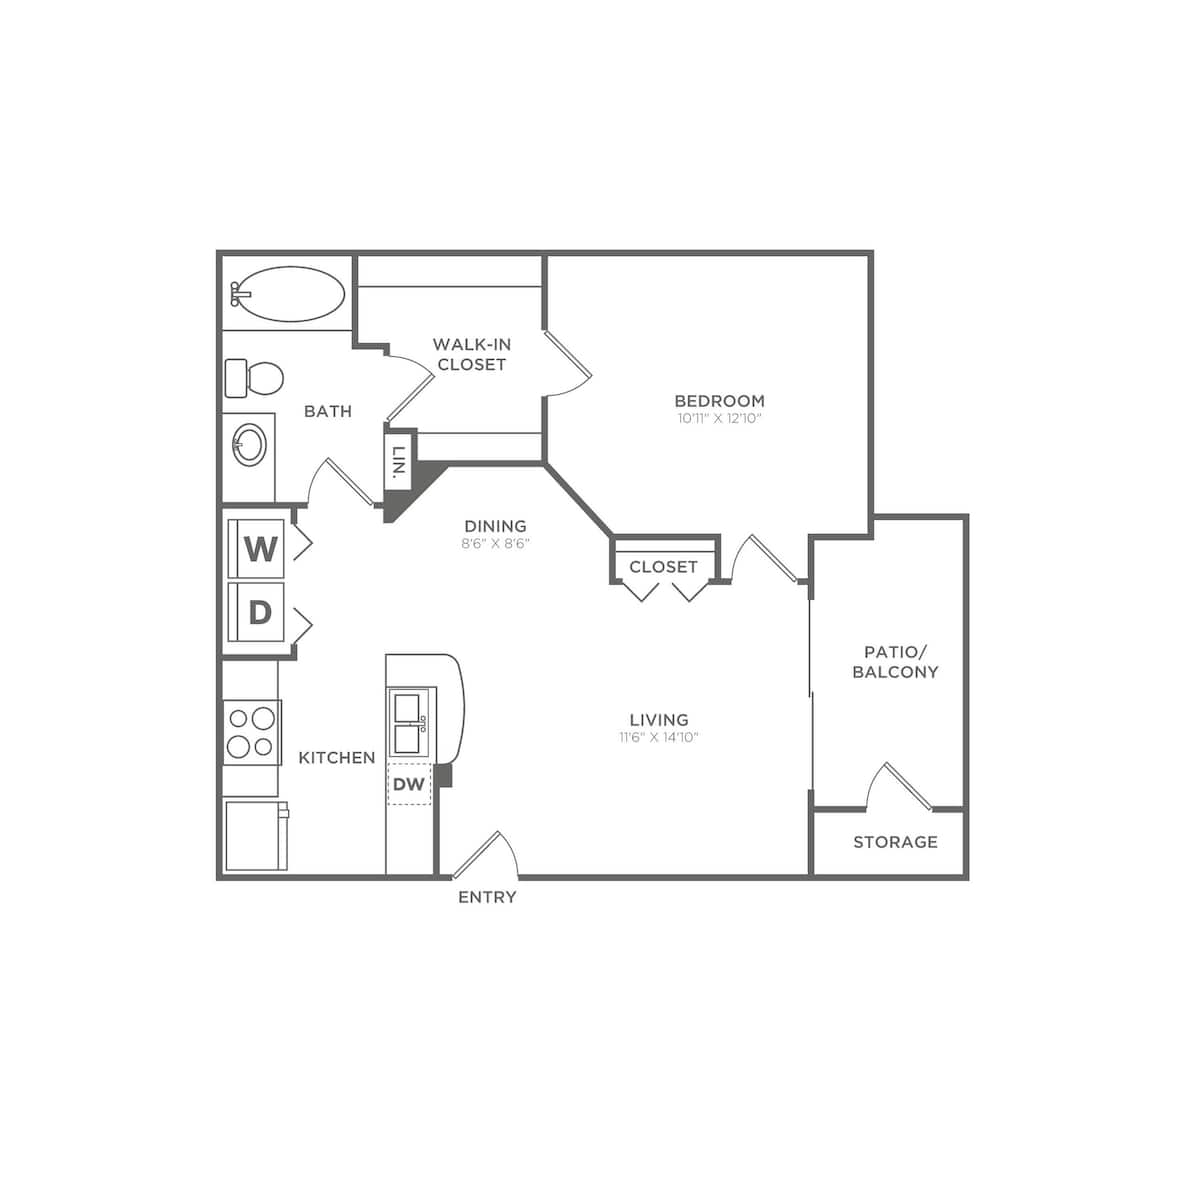 Floorplan diagram for A-Tailored, showing 1 bedroom